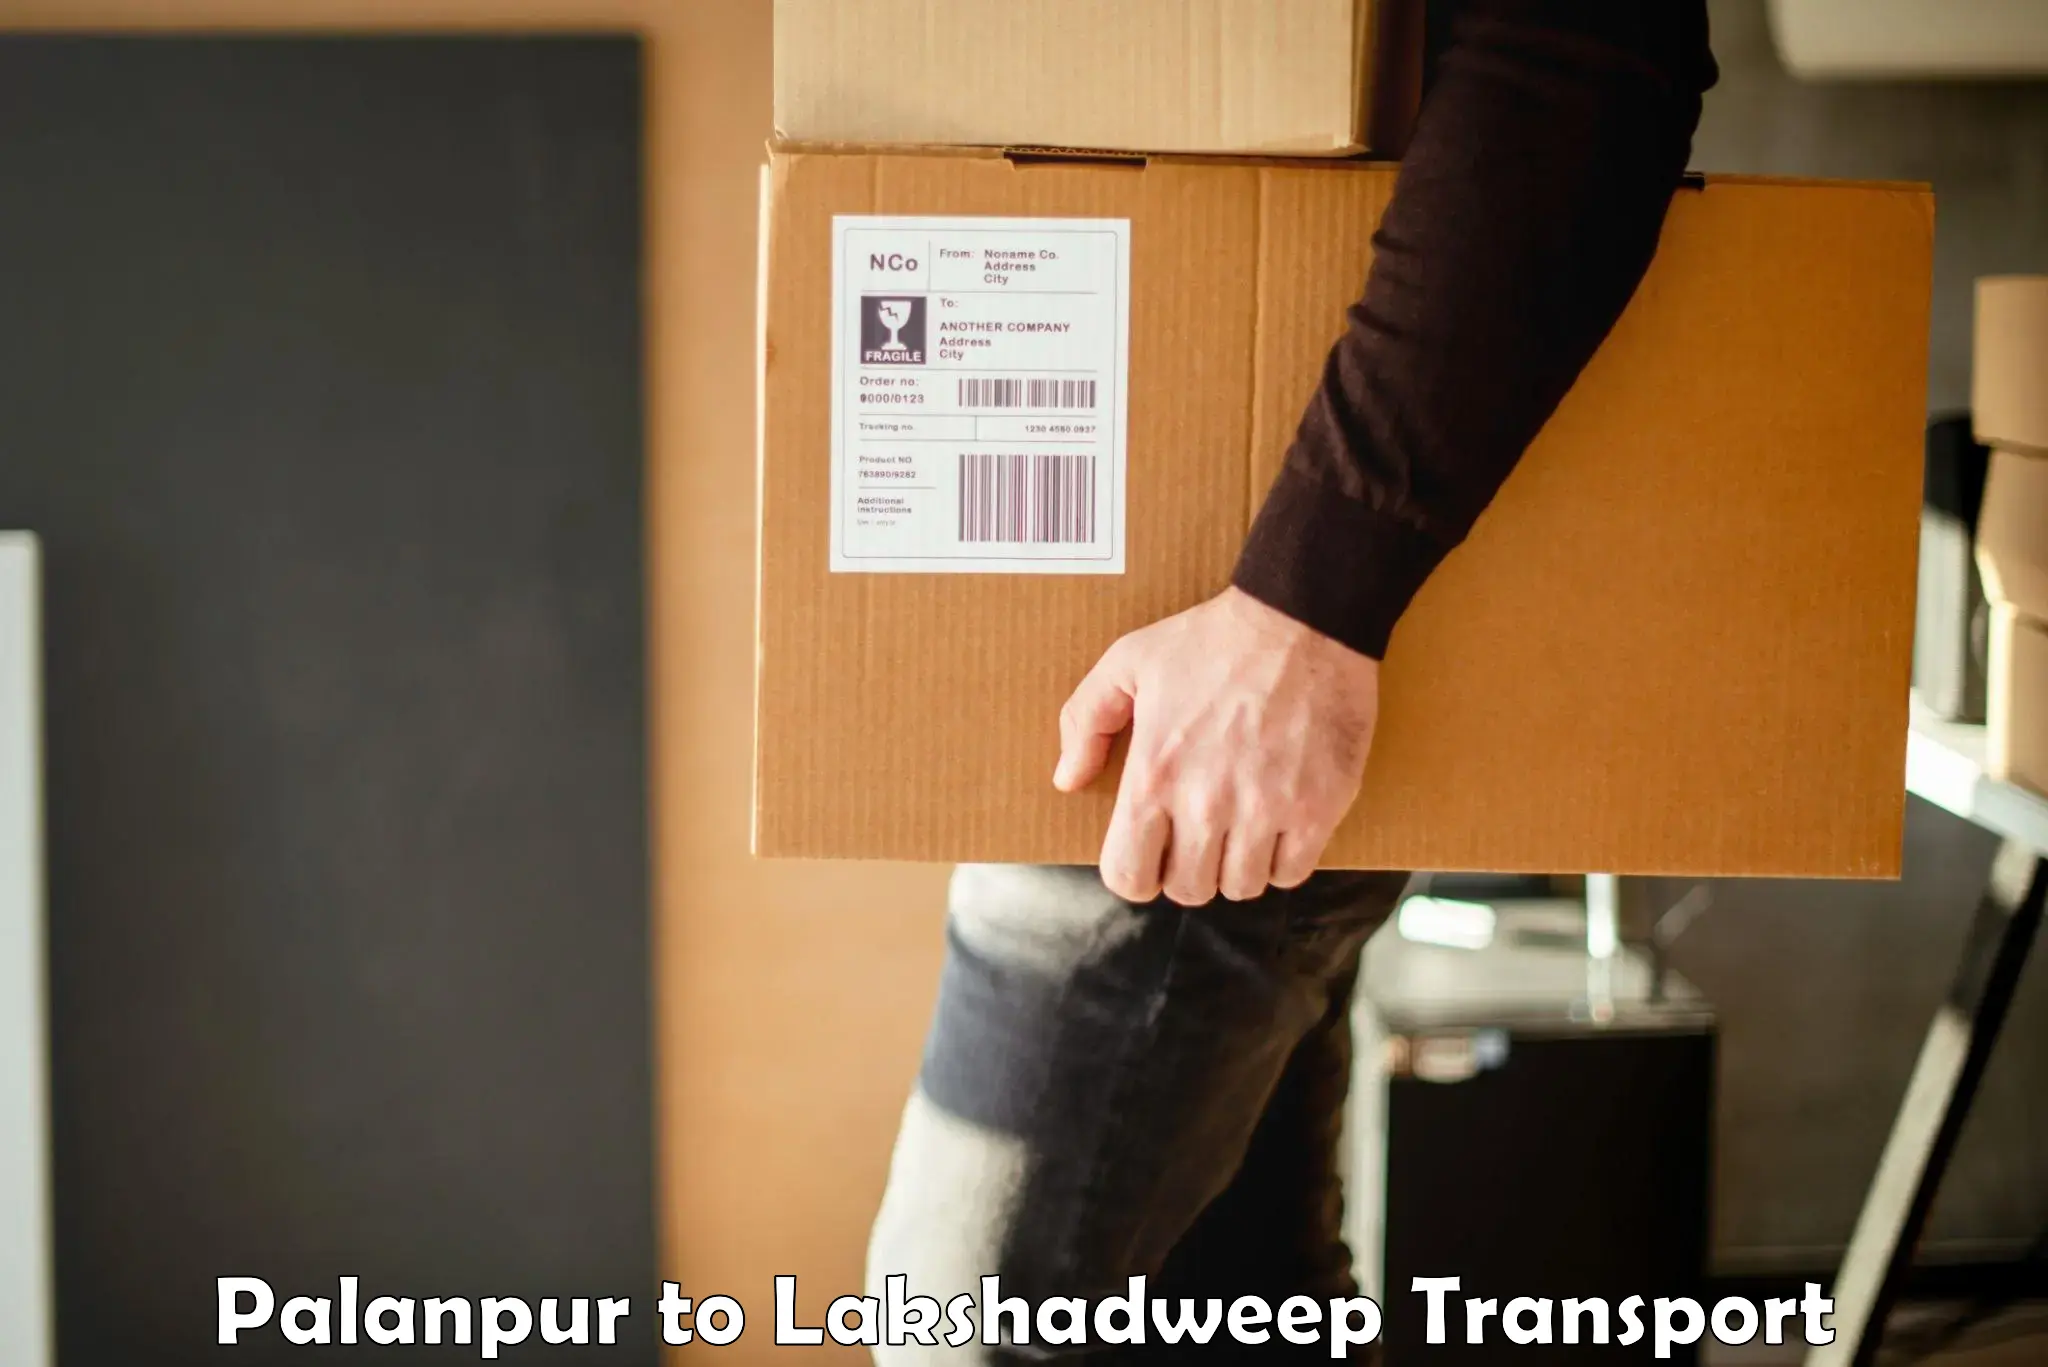 Truck transport companies in India Palanpur to Lakshadweep